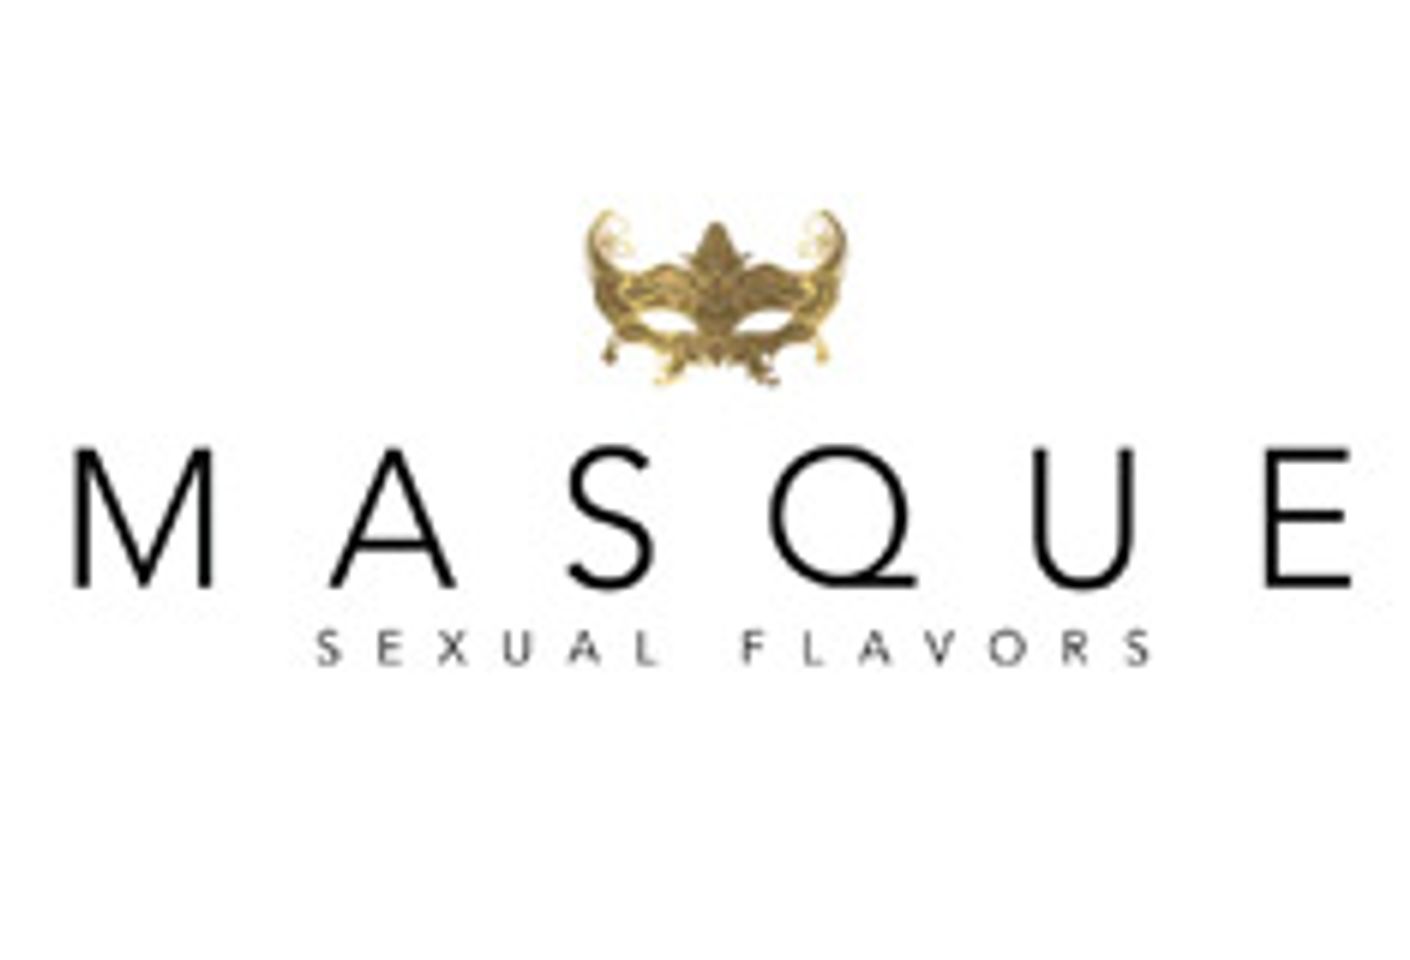 Masque Sexual Flavors Now Available Exclusively at Calvista